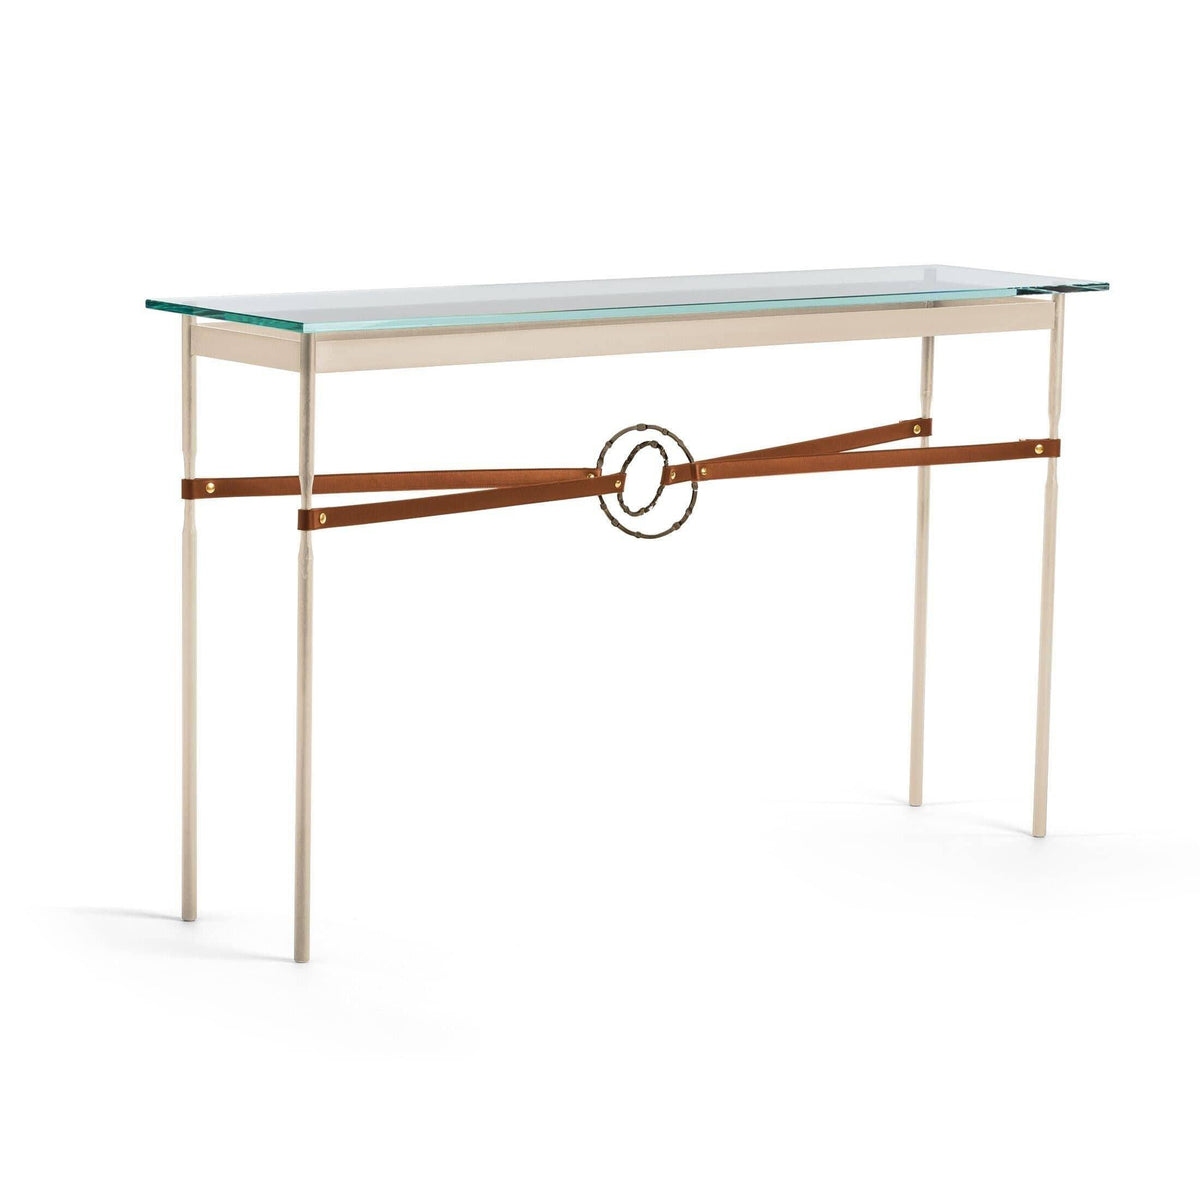 Hubbardton Forge - Equus Chestnut Leather Console Table - 750118-84-05-LC-VA0714 | Montreal Lighting & Hardware